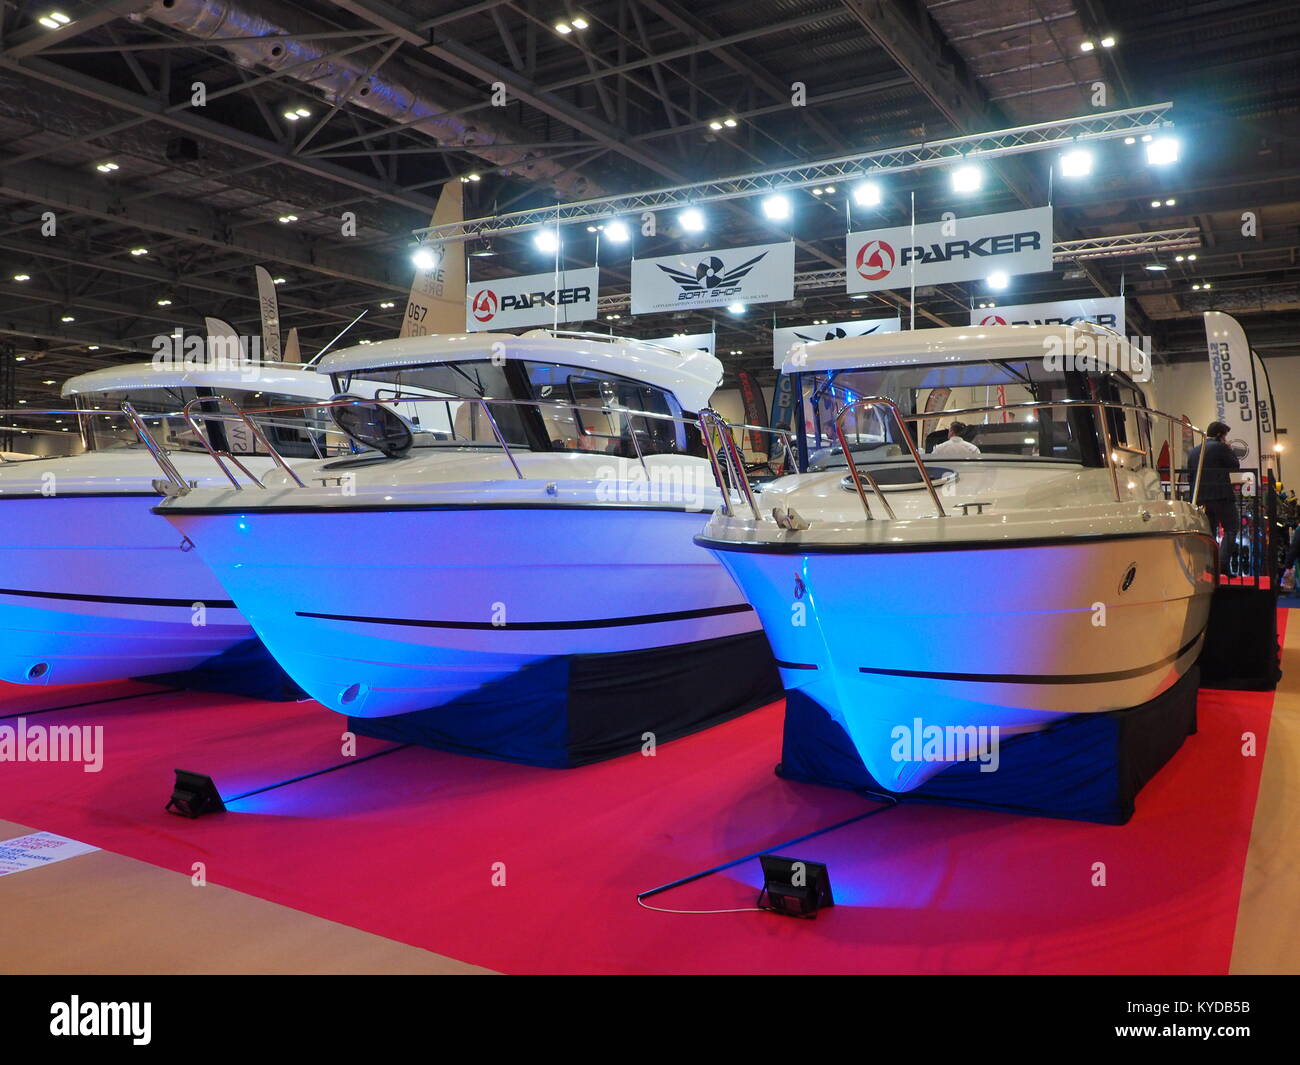 London, UK. 14th Jan, 2018. The last day of the London Boat Show was packed with people, as the UK's buoyant boating sector has recently reported record sales thanks to the weak pound. Credit: James Bell/Alamy Live News Stock Photo